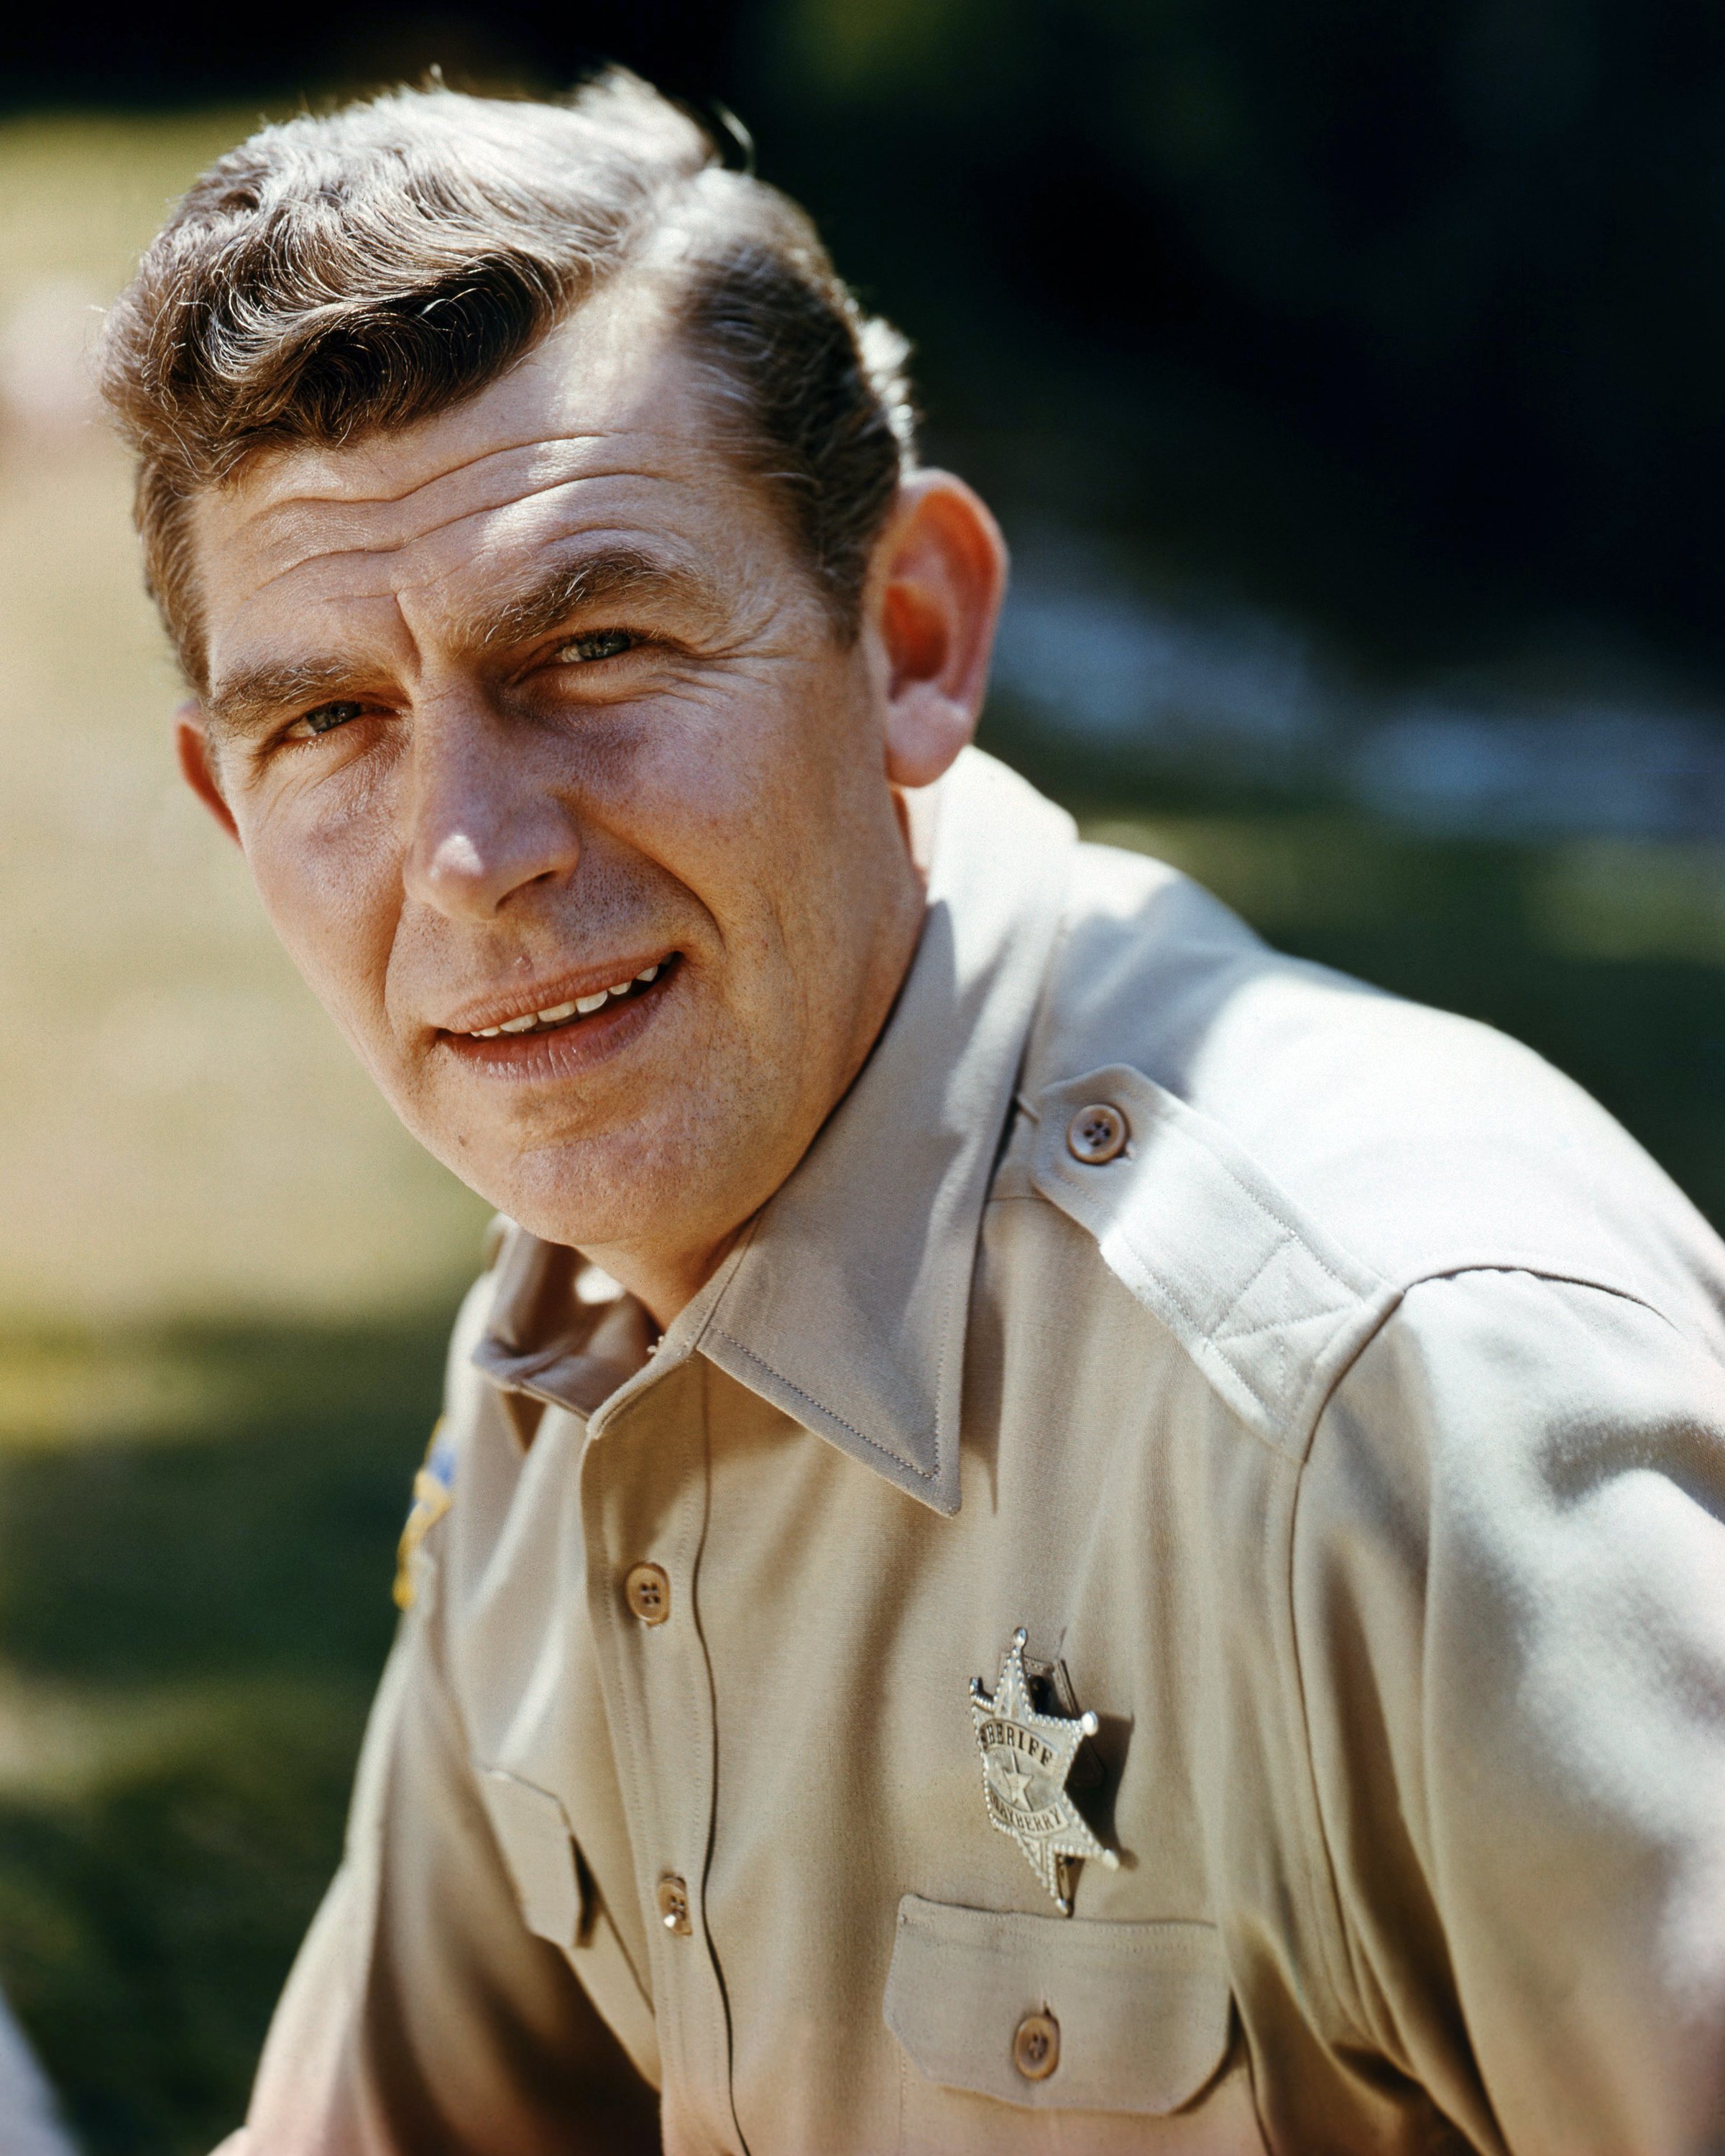 American actor Andy Griffith as Sheriff Andy Taylor in a promotional portrait for American sitcom 'The Andy Griffith Show', circa 1965 | Source: Getty Images